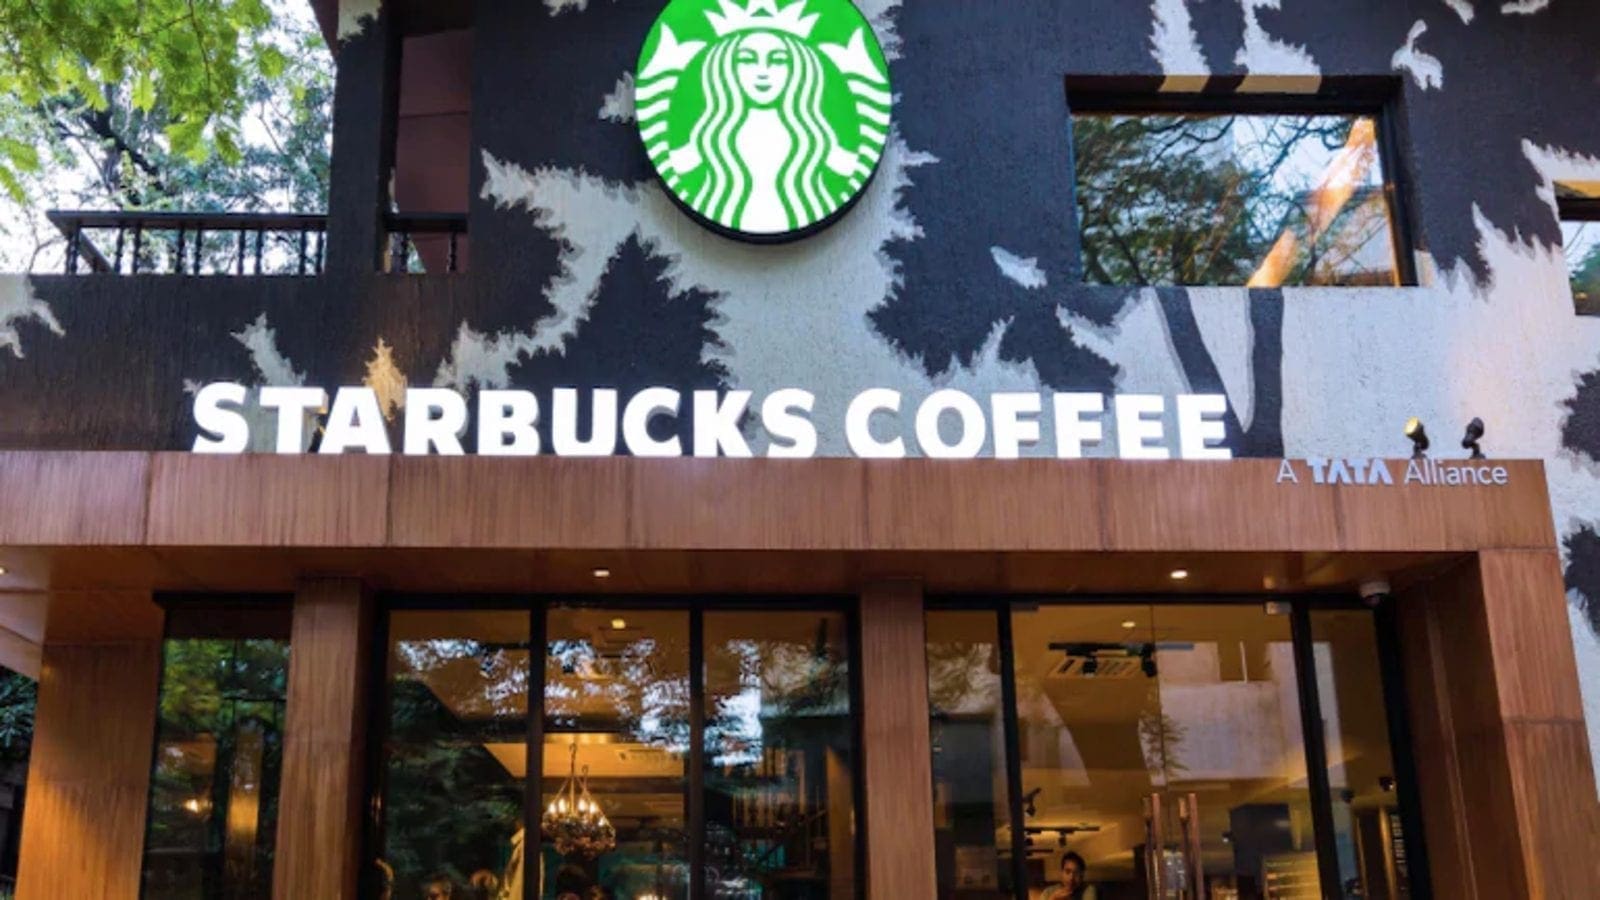 Starbucks opens 40 new coffee stores in India as KFC doubles down on women employment